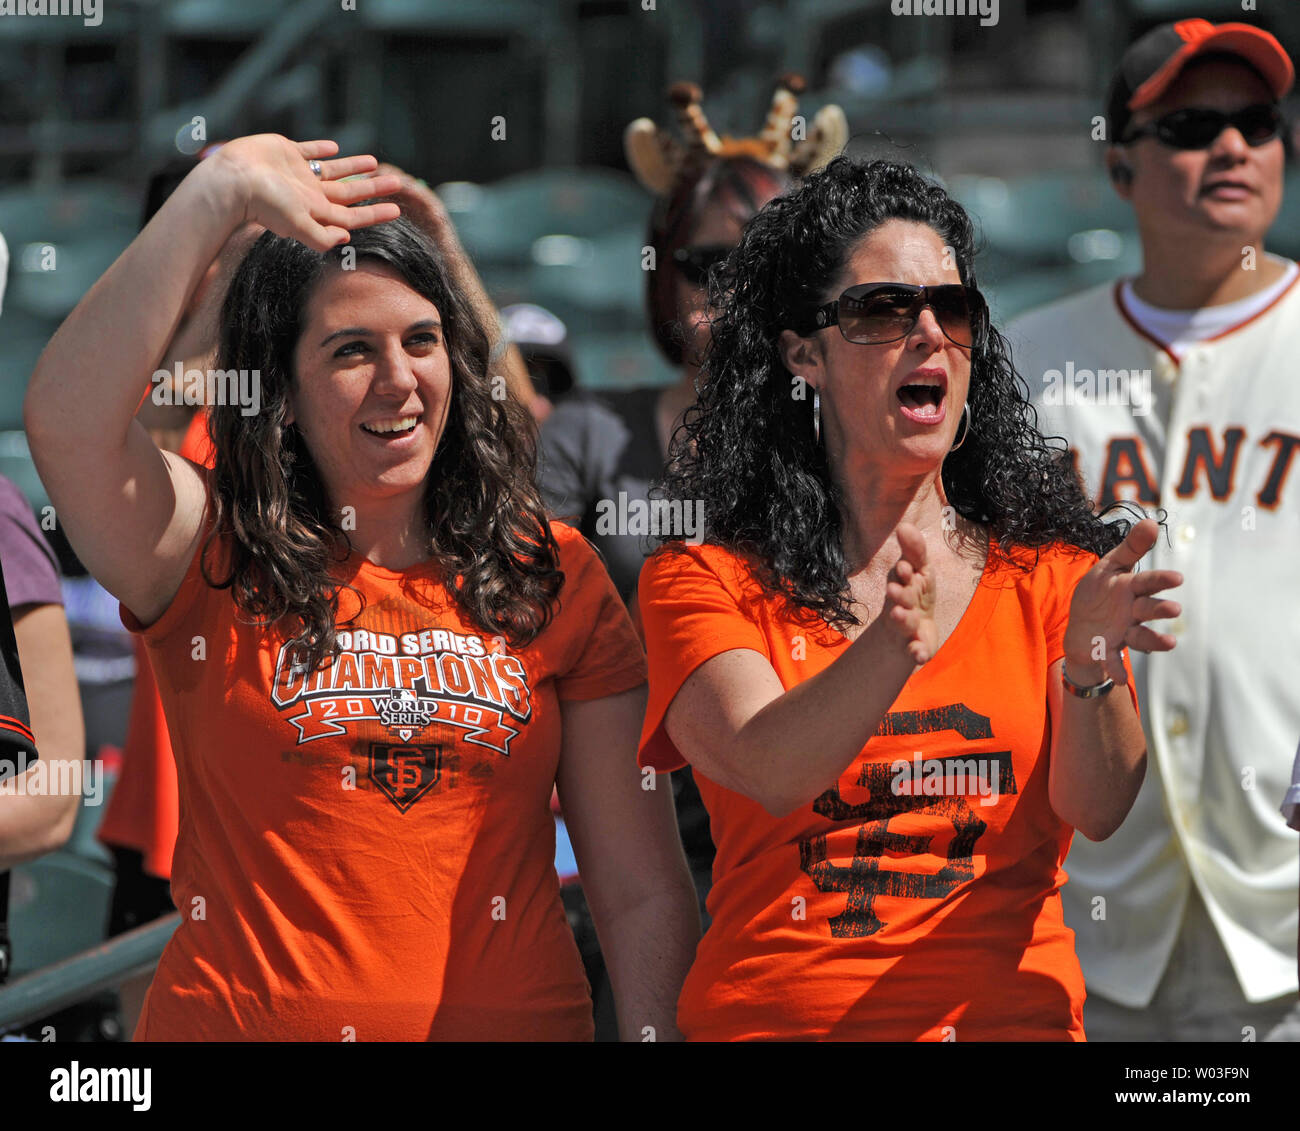 San Francisco Giants fans try to get the attention of players